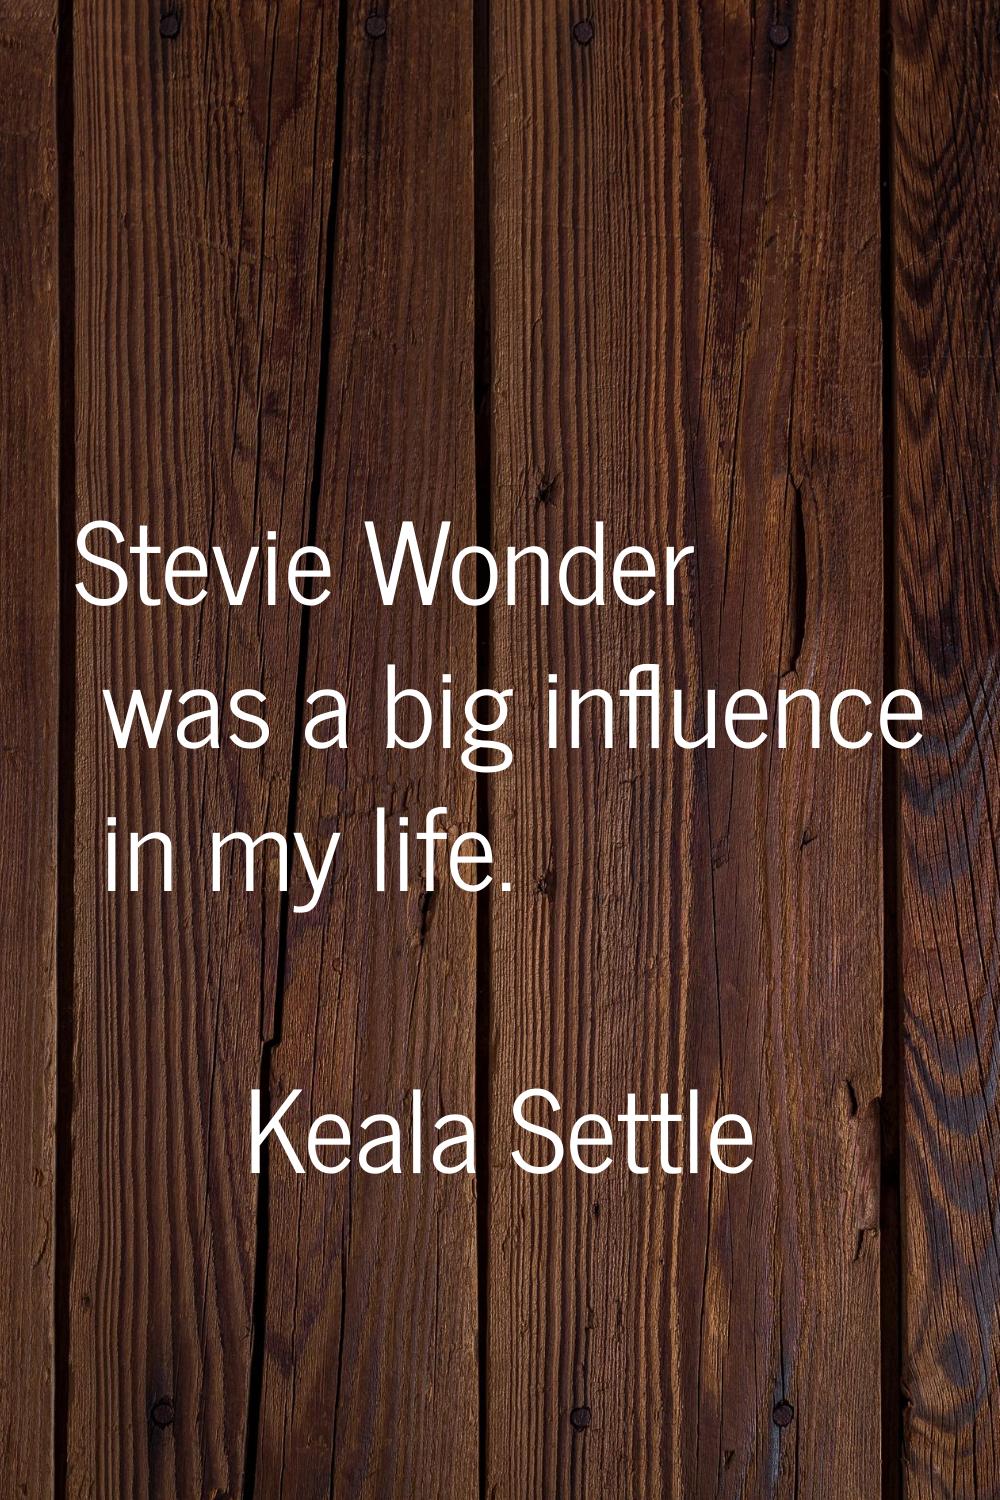 Stevie Wonder was a big influence in my life.